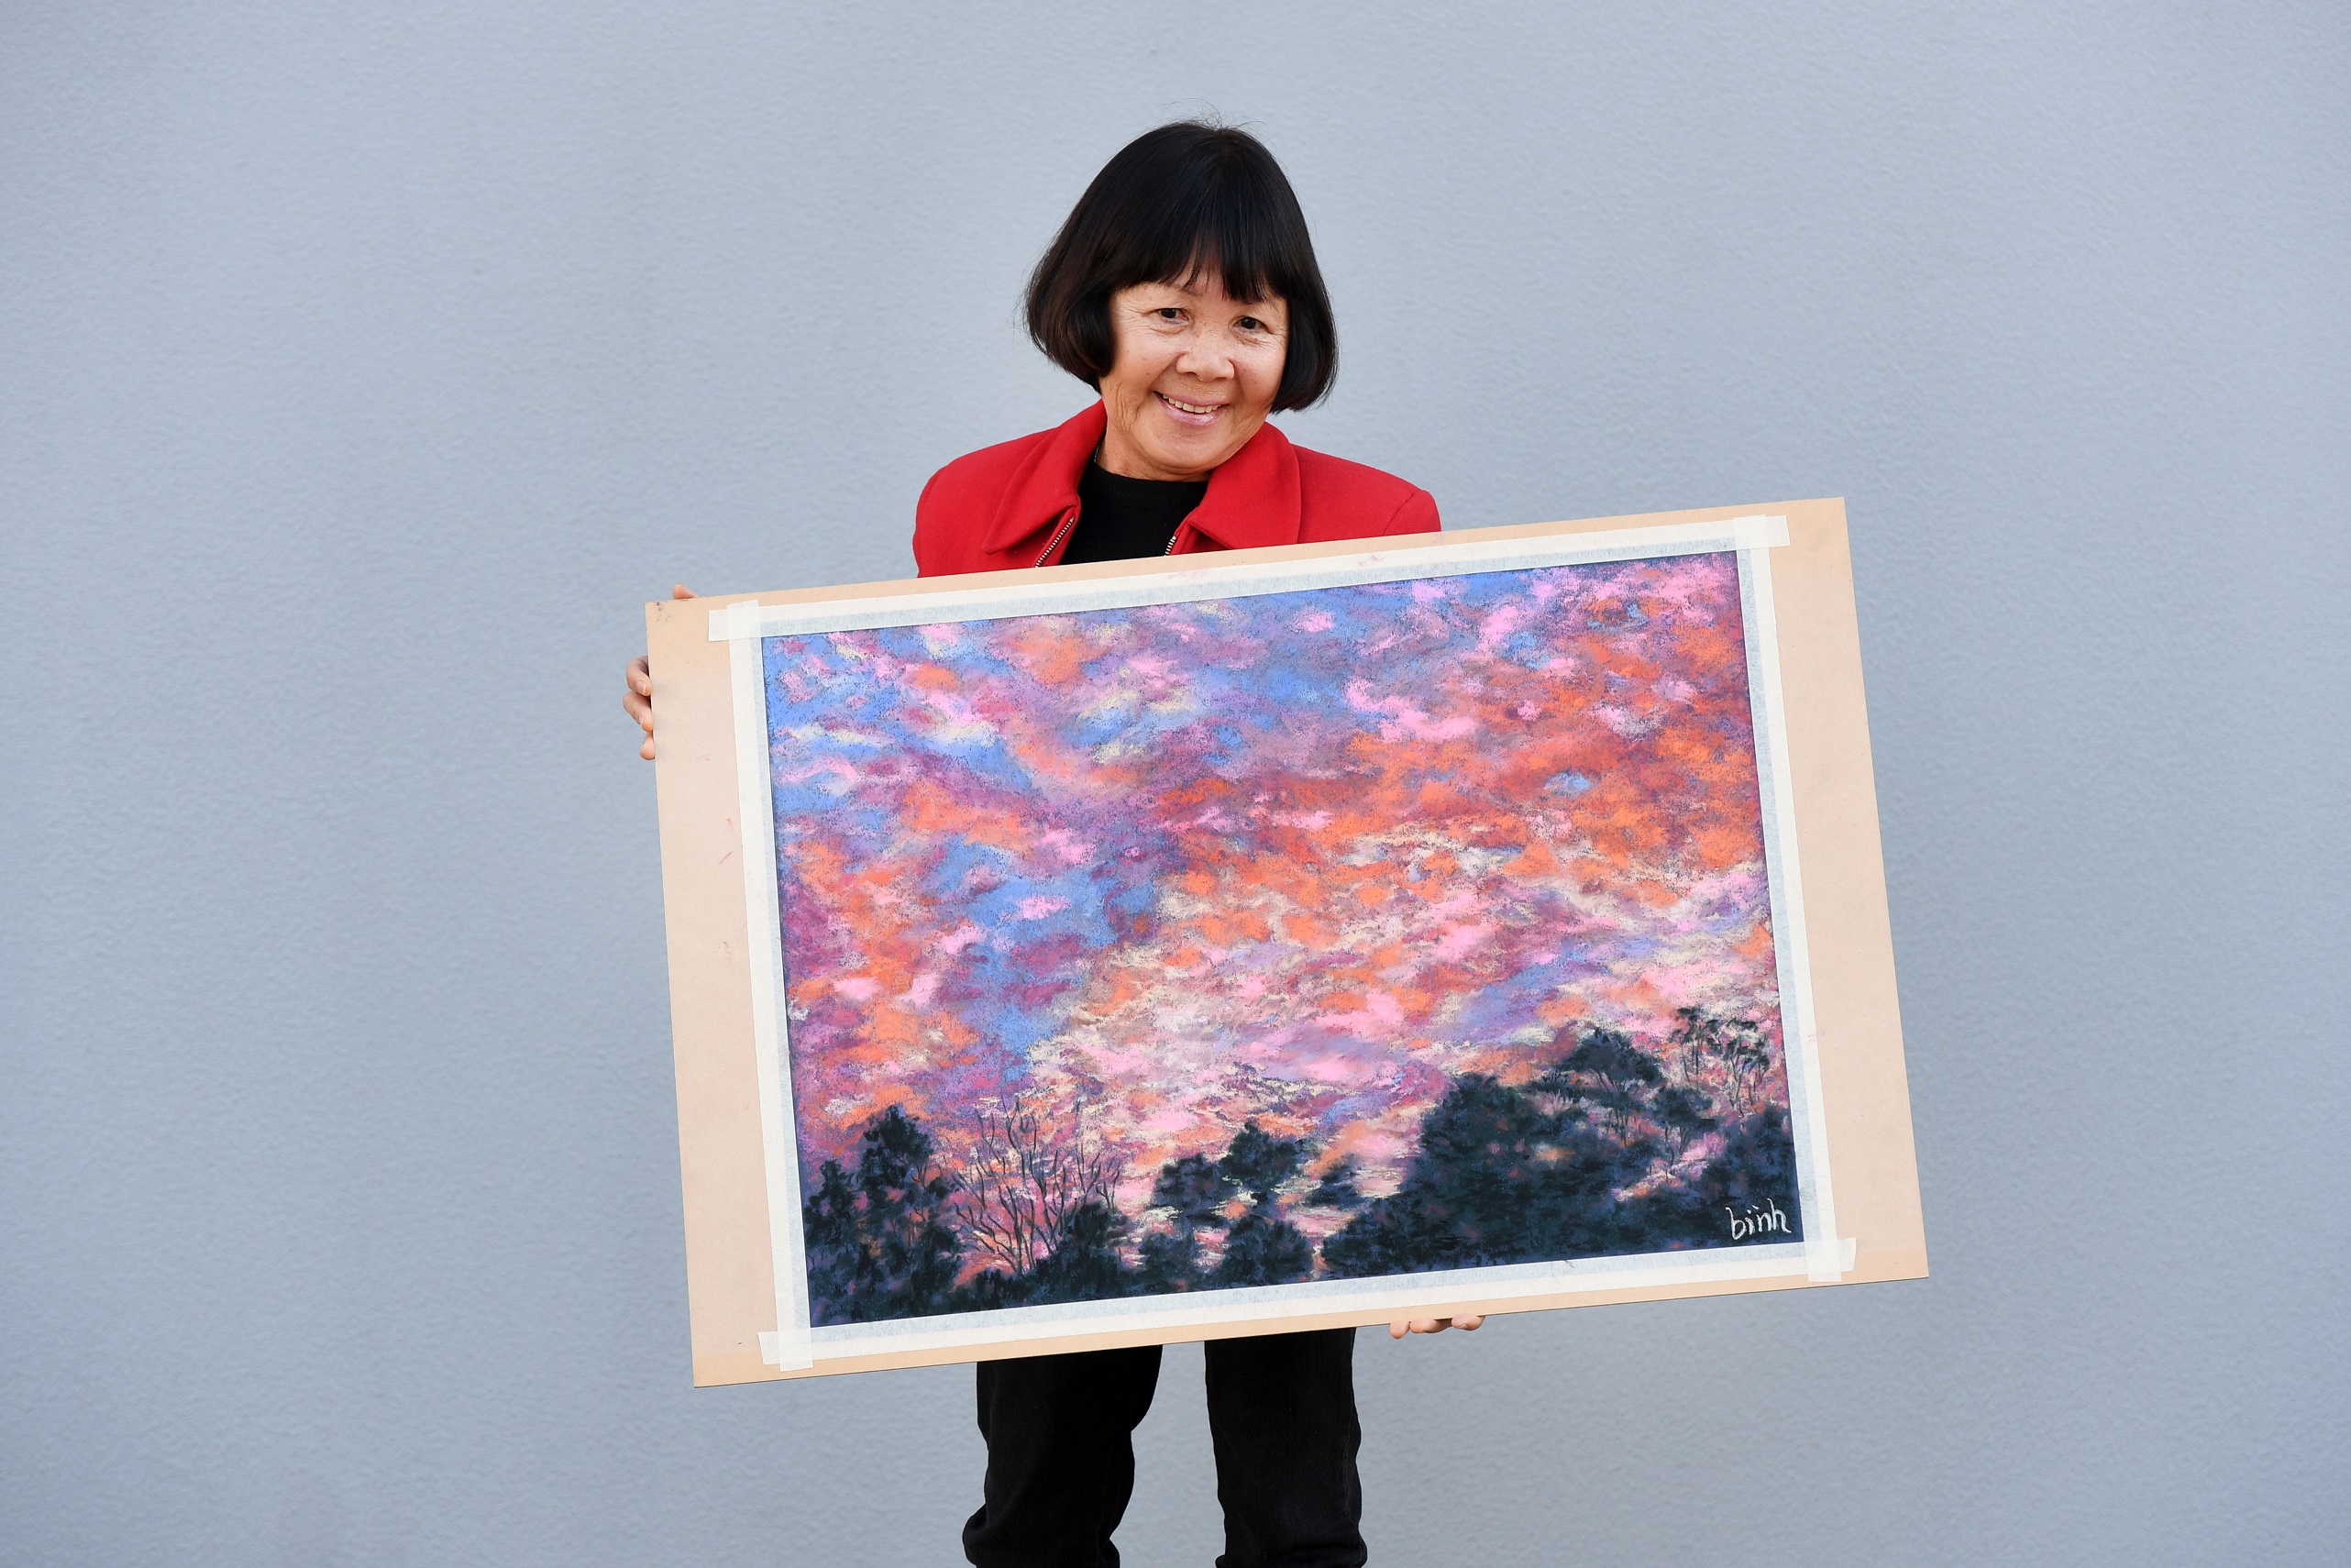 Binh holding her work that featured in the 2019 calendar